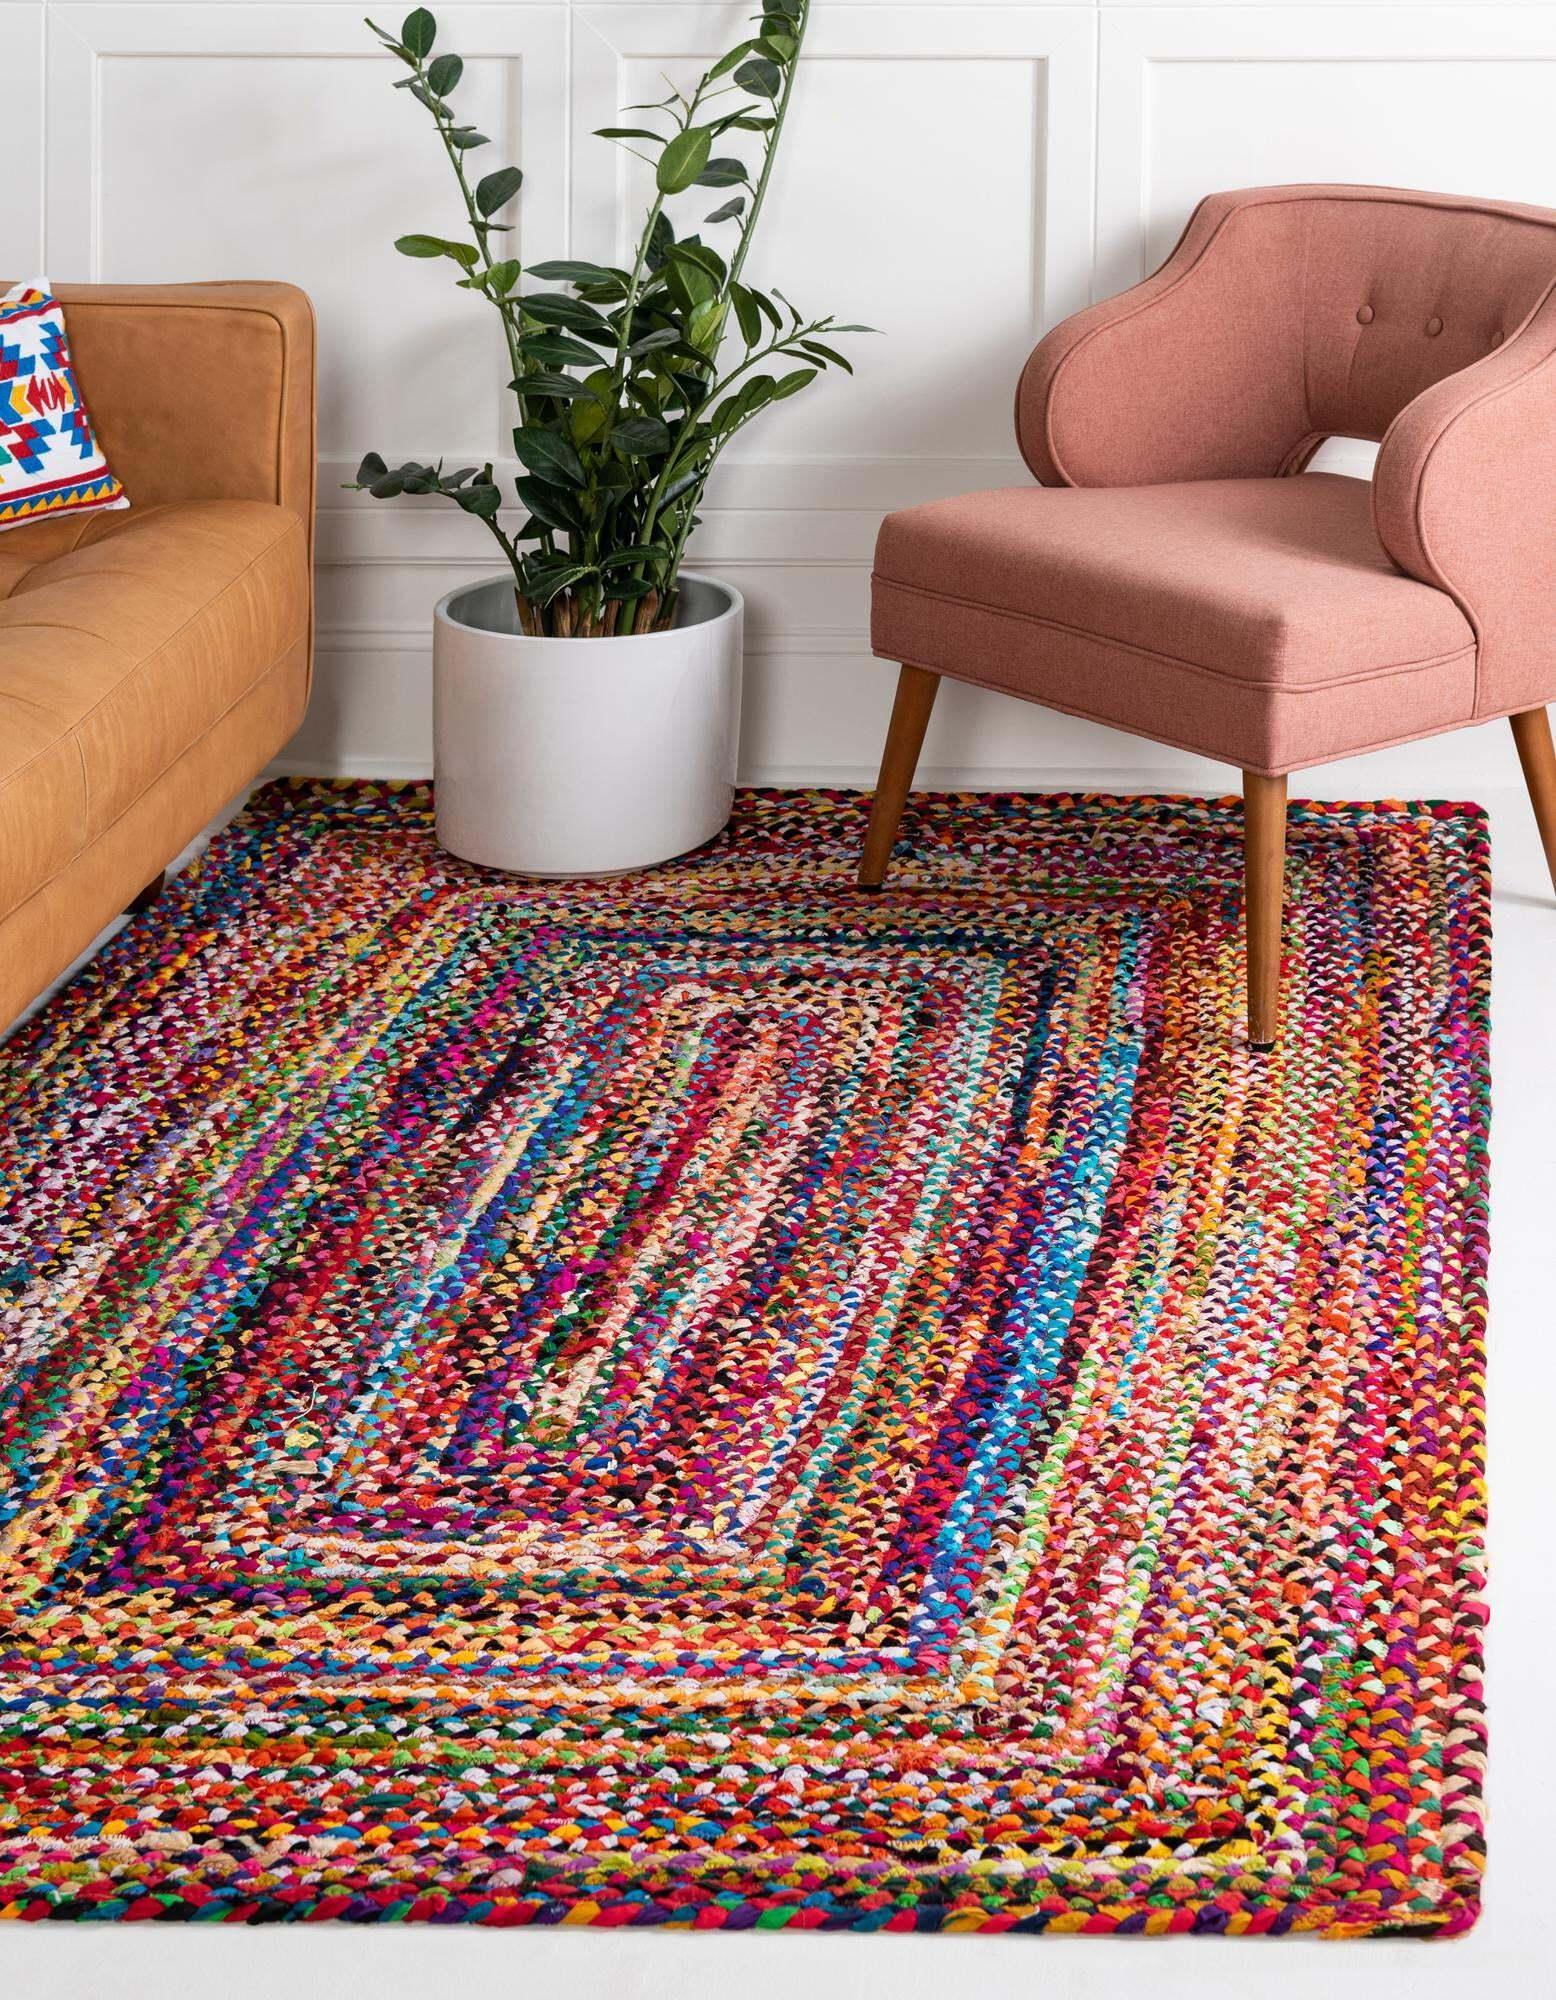 Unique Loom Indoor Rugs - Braided Chindi Abstract Rectangular 8x10 Rug Multi & Pink